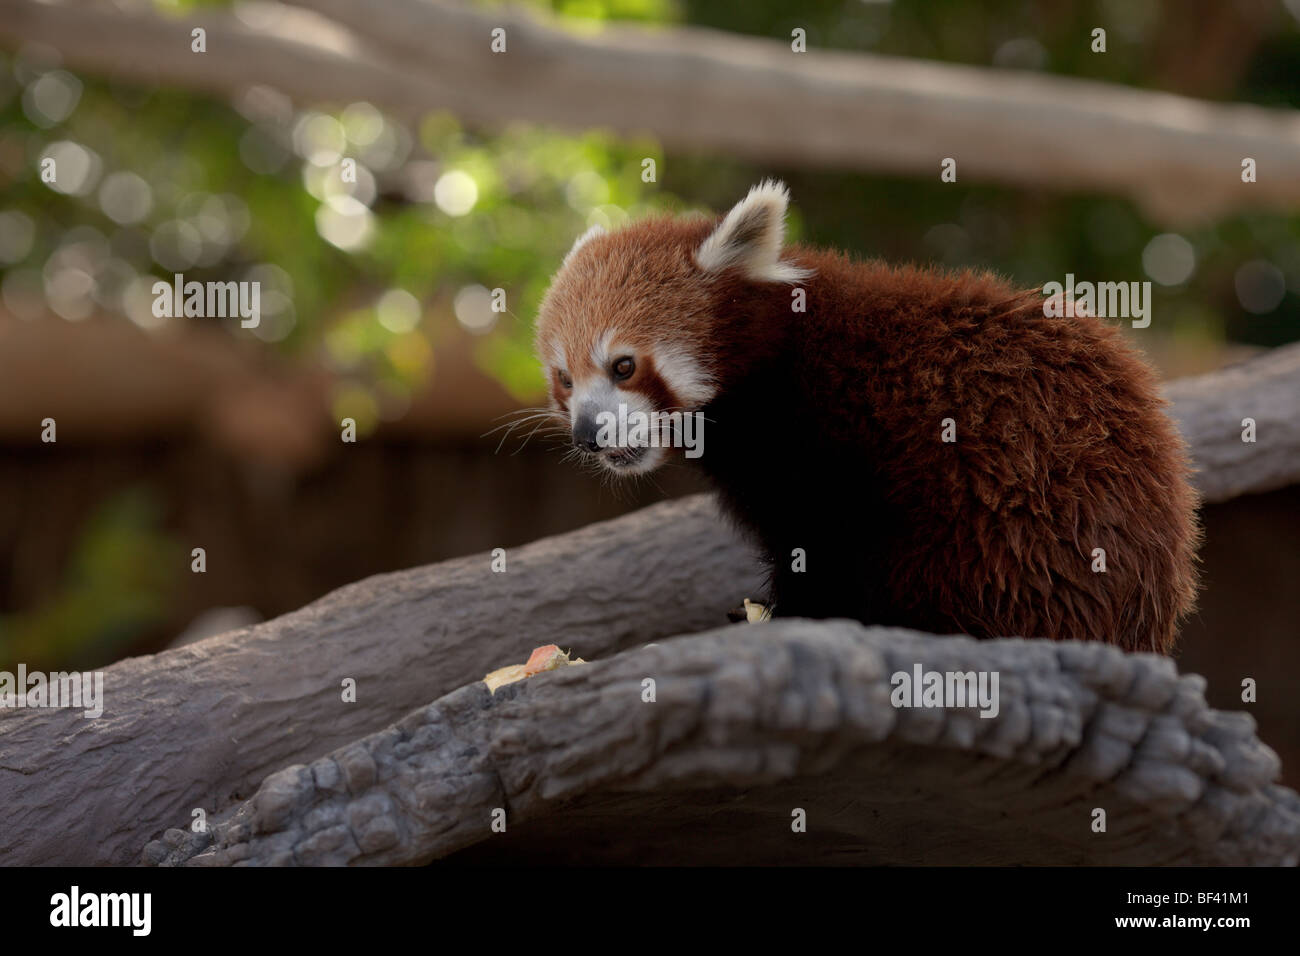 A Red Panda feeding on a varied selection of bamboo and fresh fruit. Stock Photo